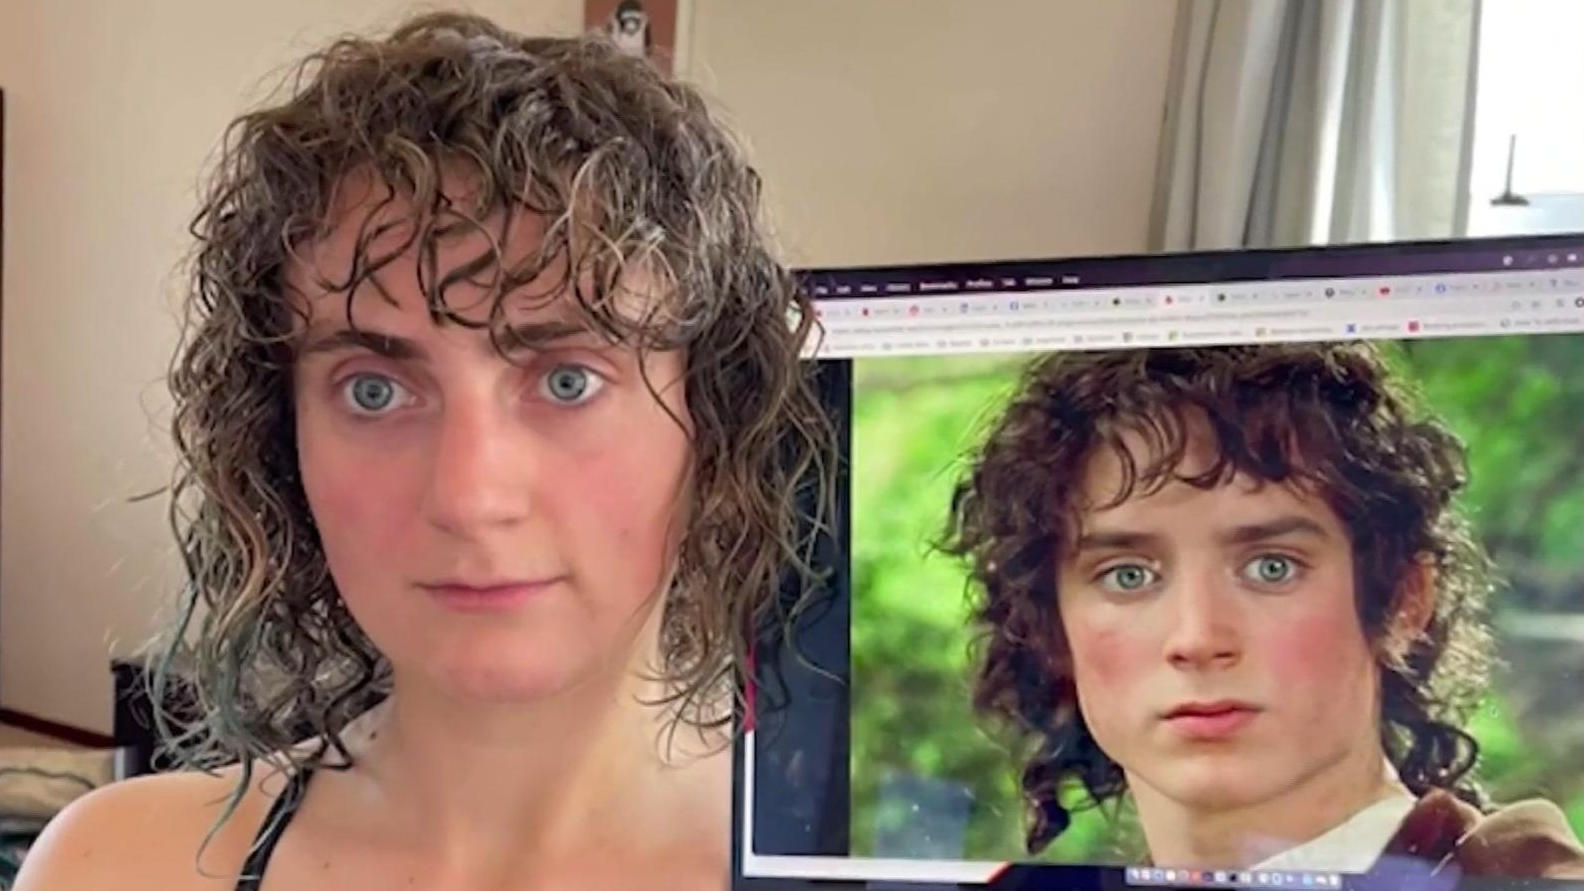 Dieses Umstyling ging voll daneben! Frodo-Frise par excellence